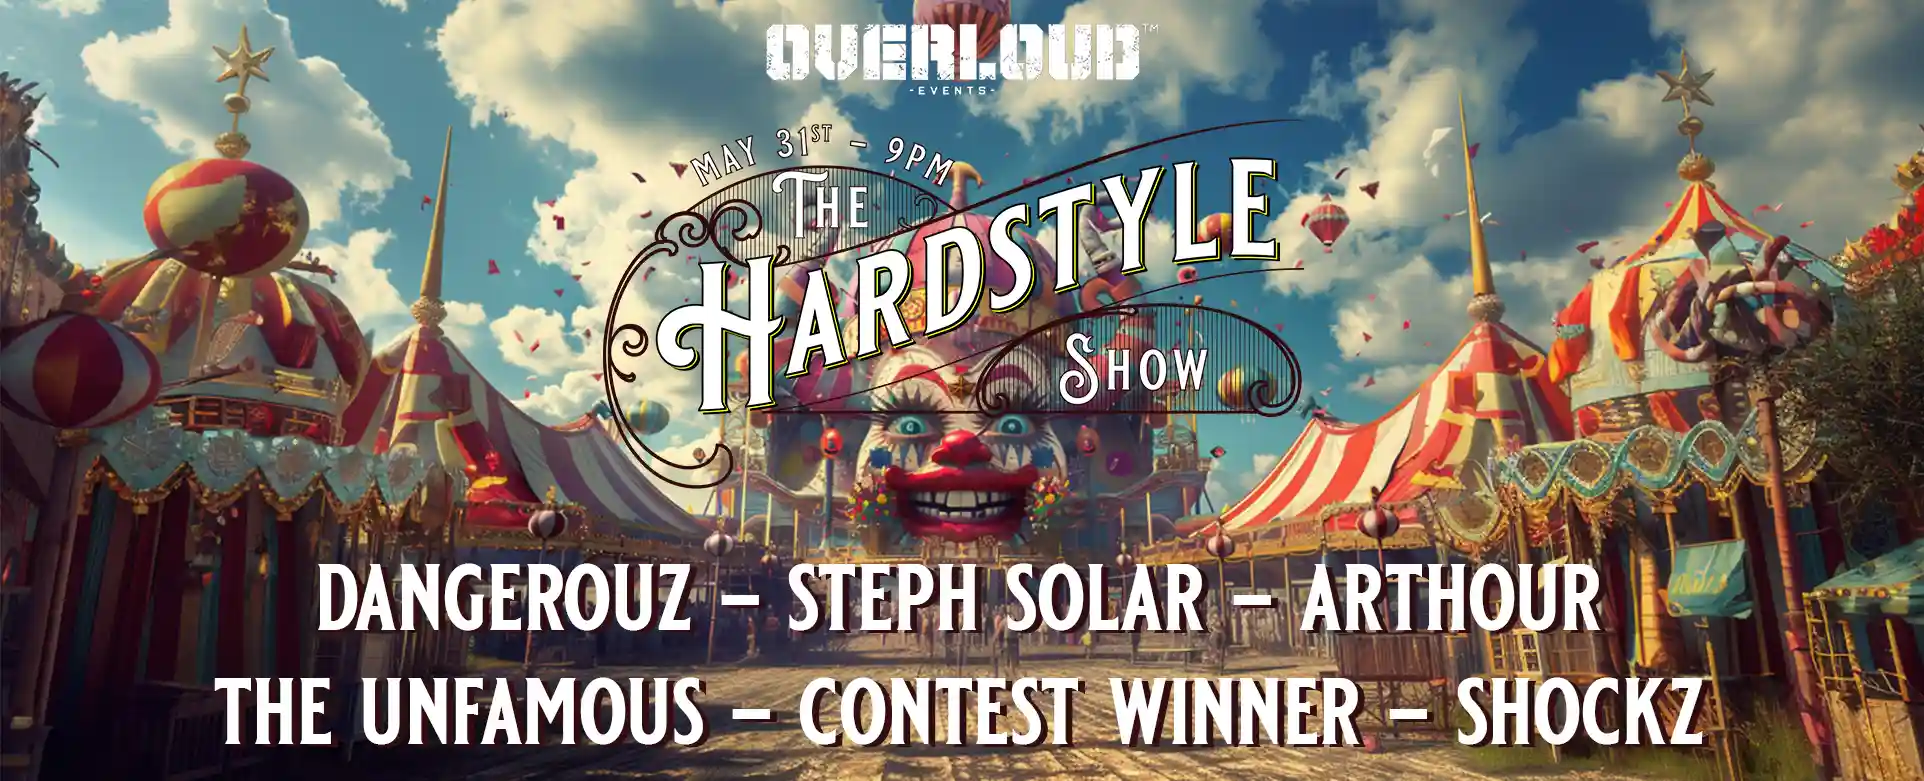 Image of the event The hardstyle show VI